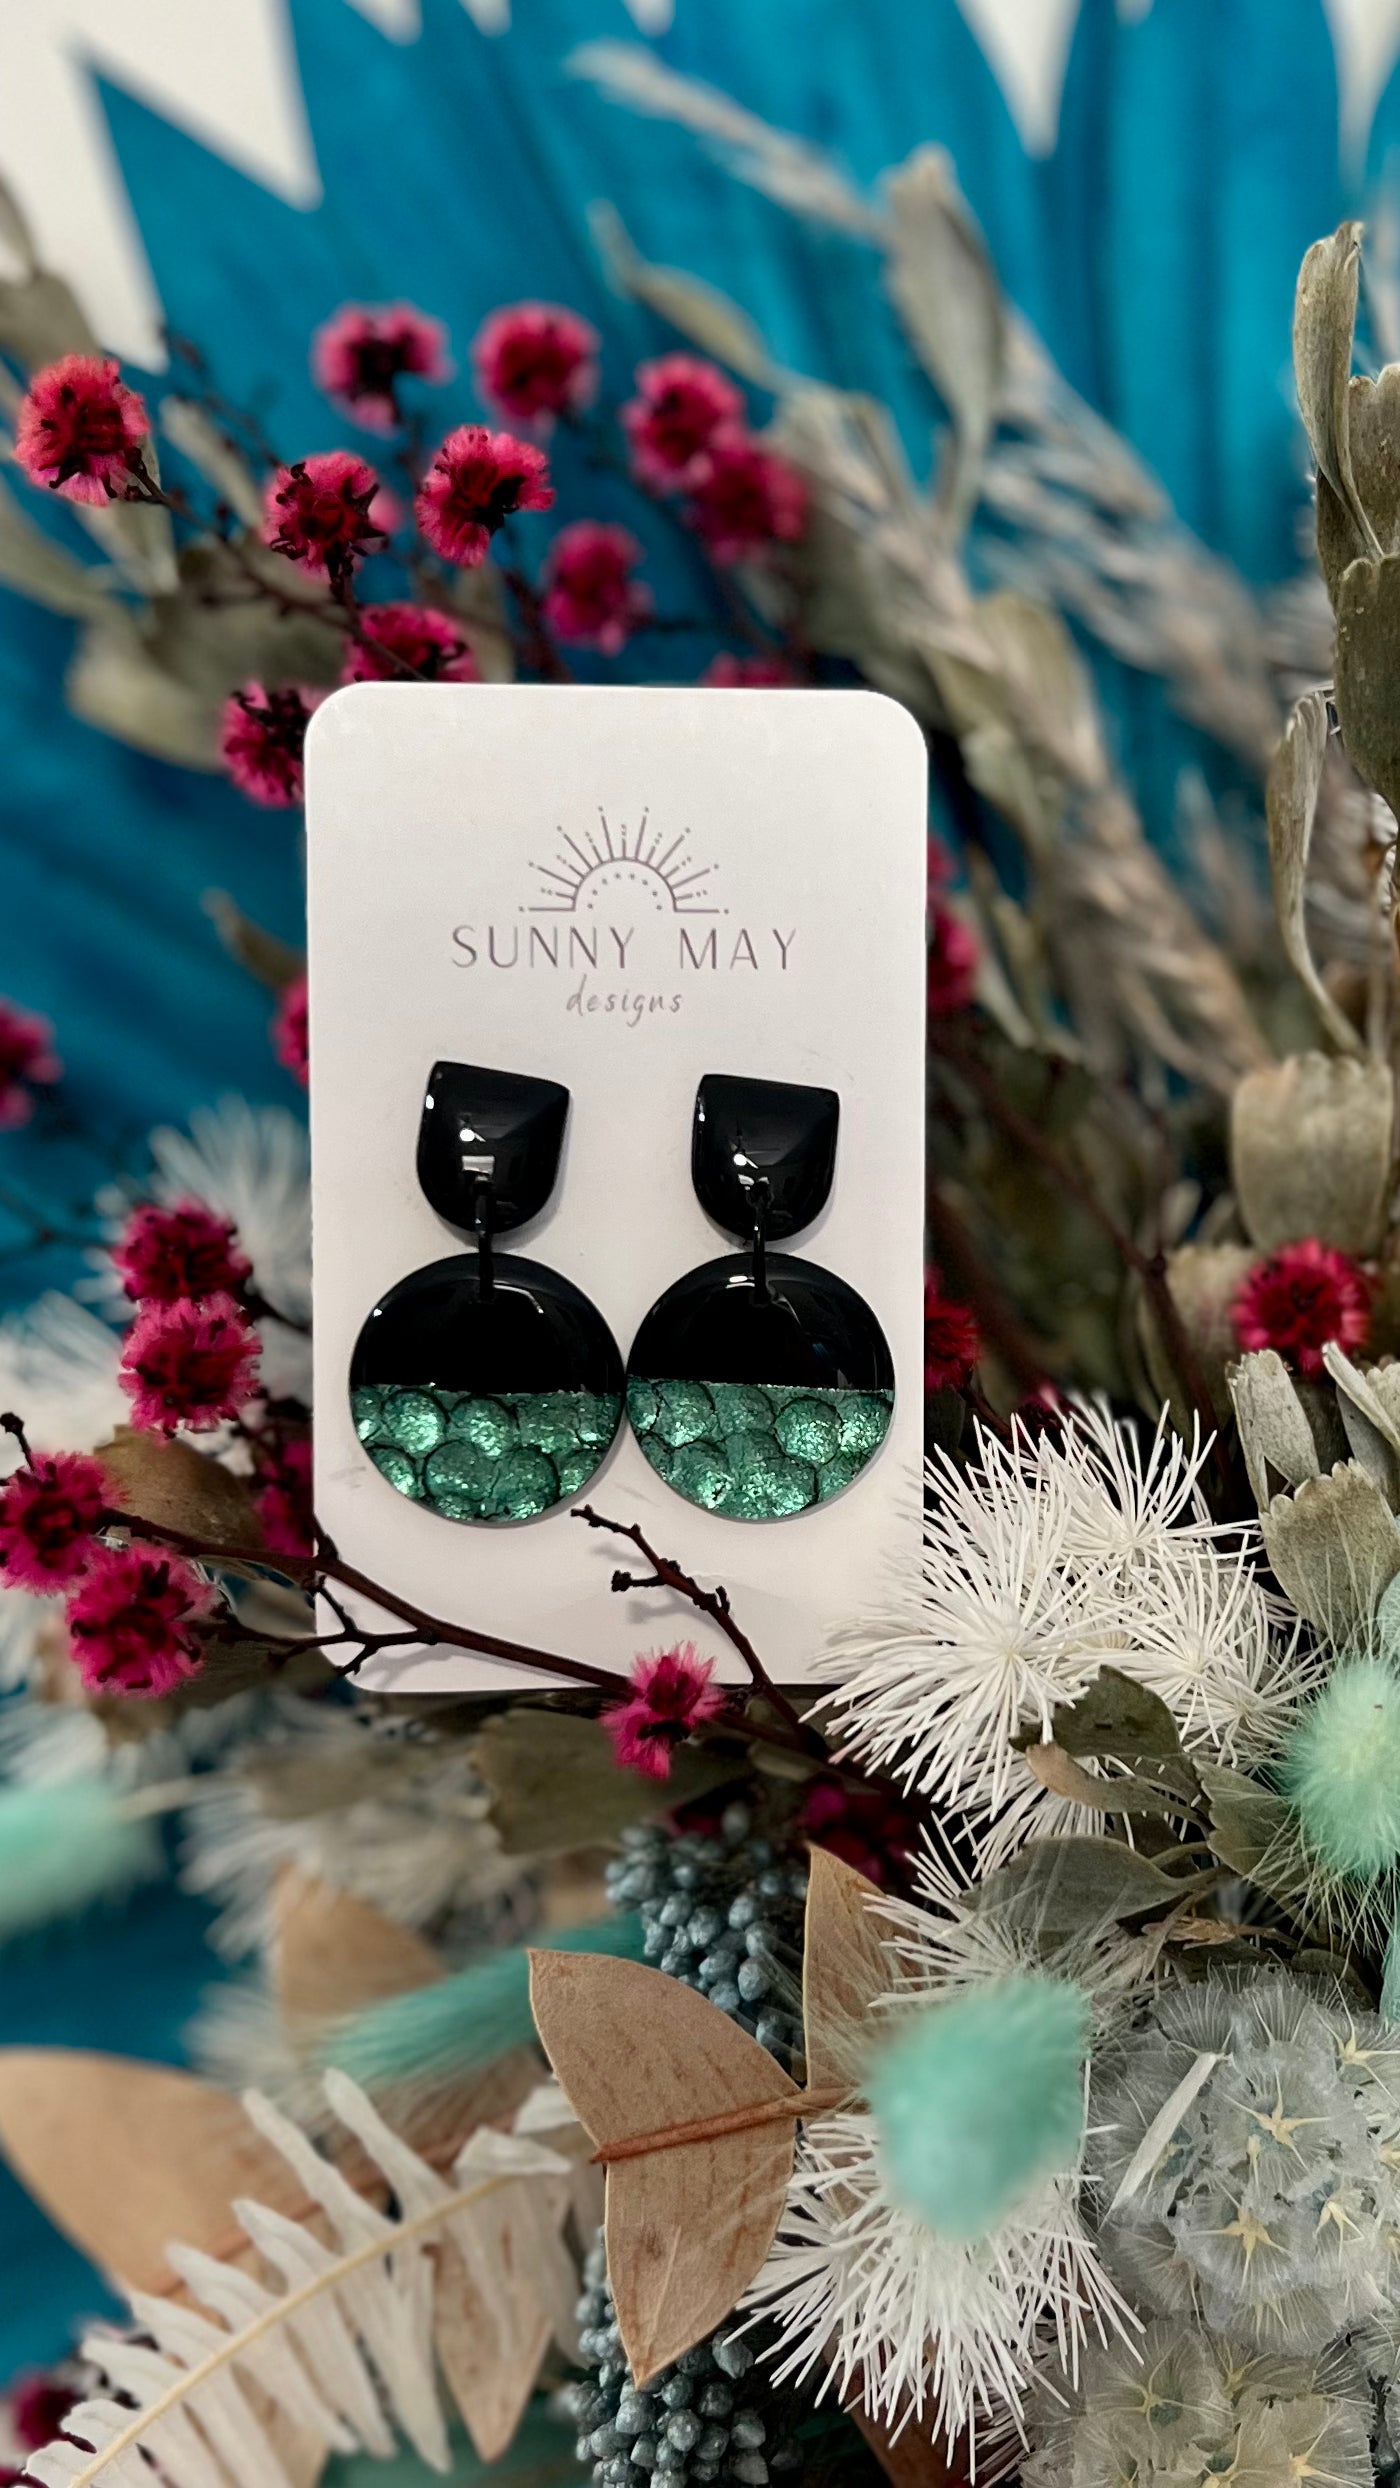 Sunny May Black Foil Earrings: These earrings are handmade from a delightful mix of gloss black with a vibrant contrasting foil feature
These gorgeous pieces are made in Perth WA  - Ciao Bella Dresses 